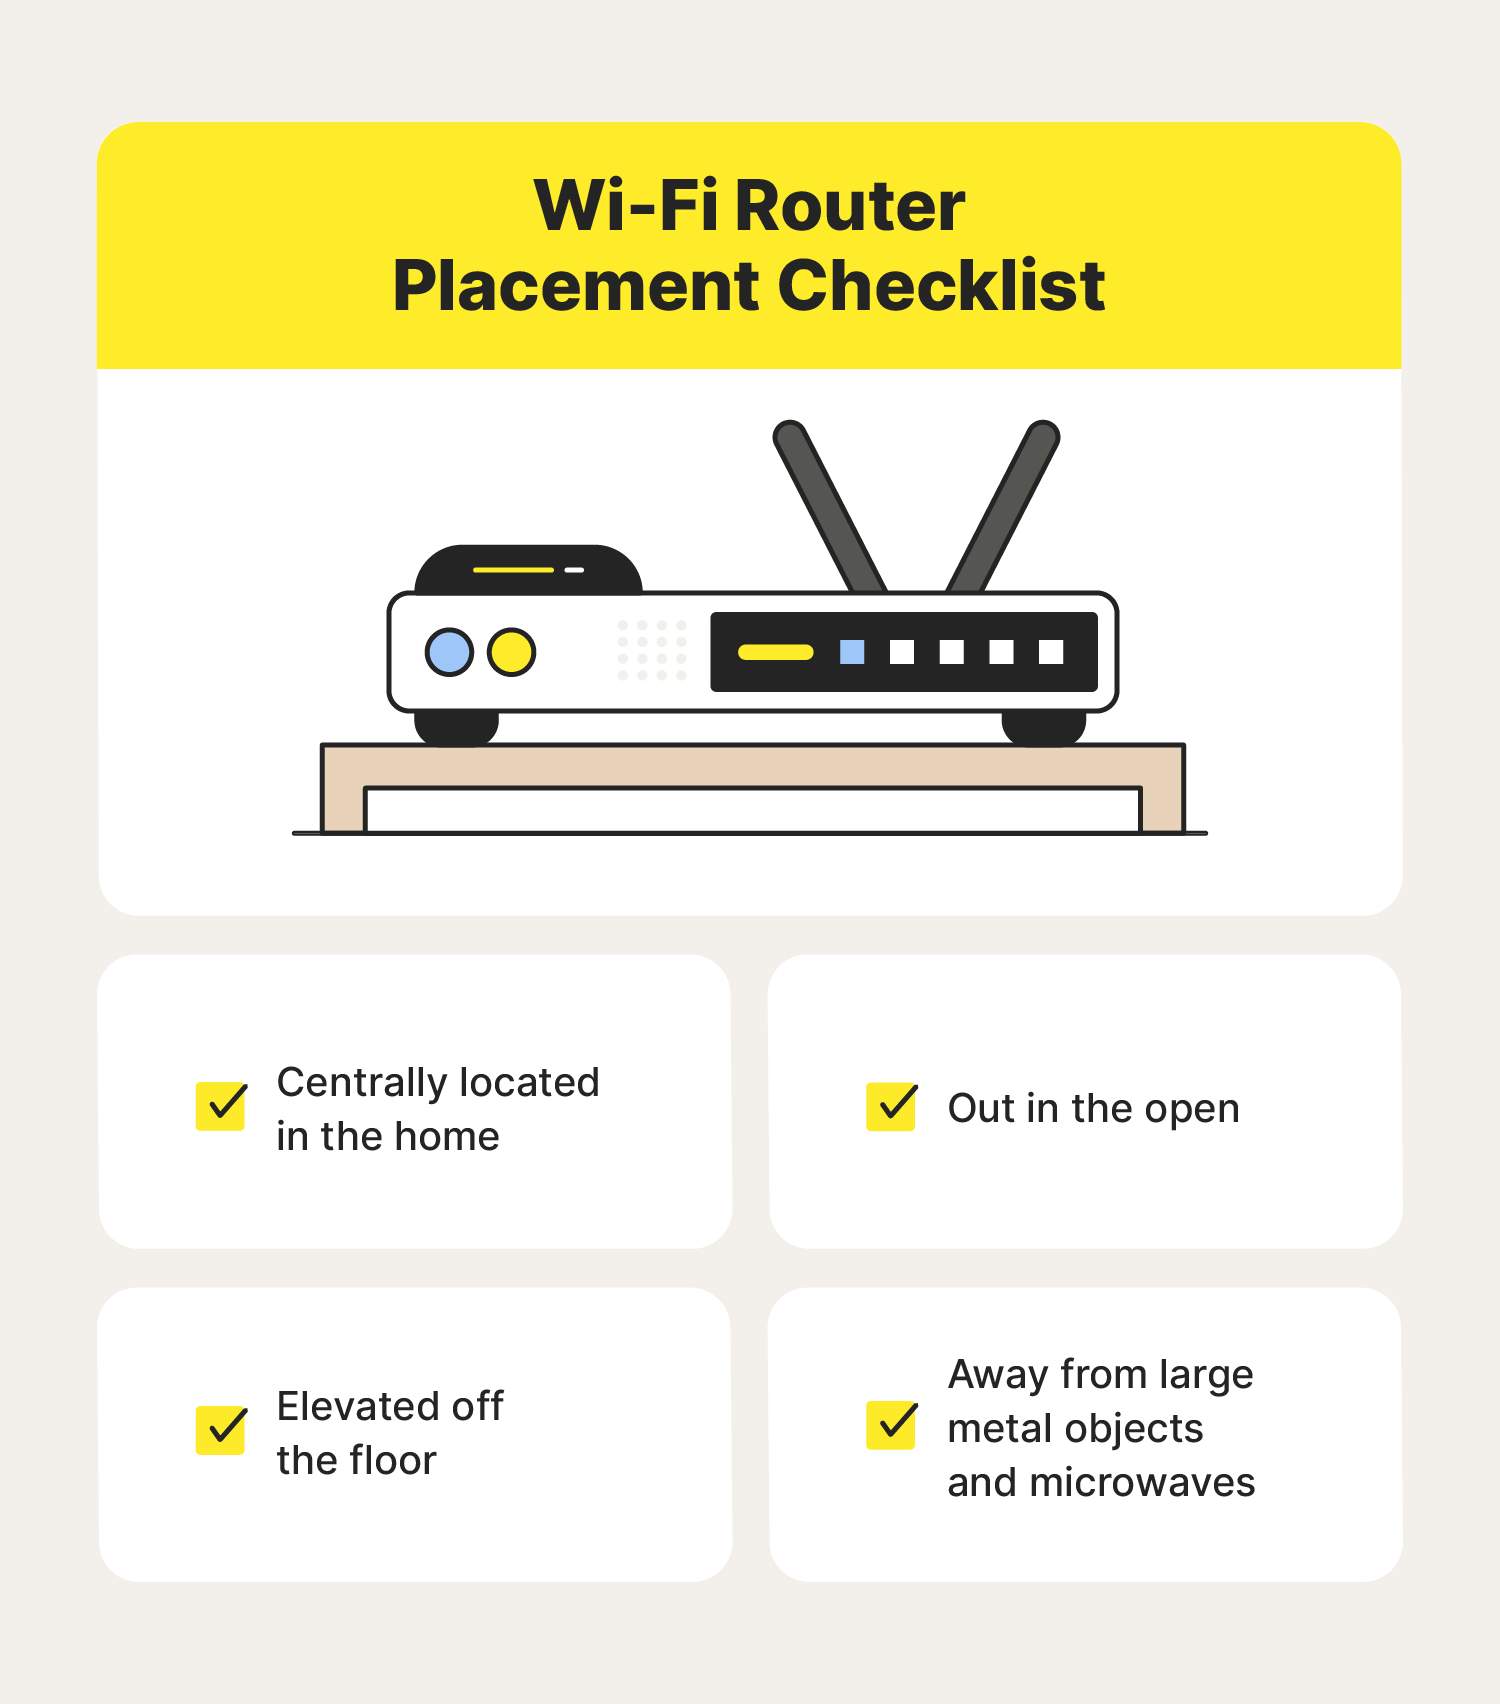 Wi-fi router placement checklist